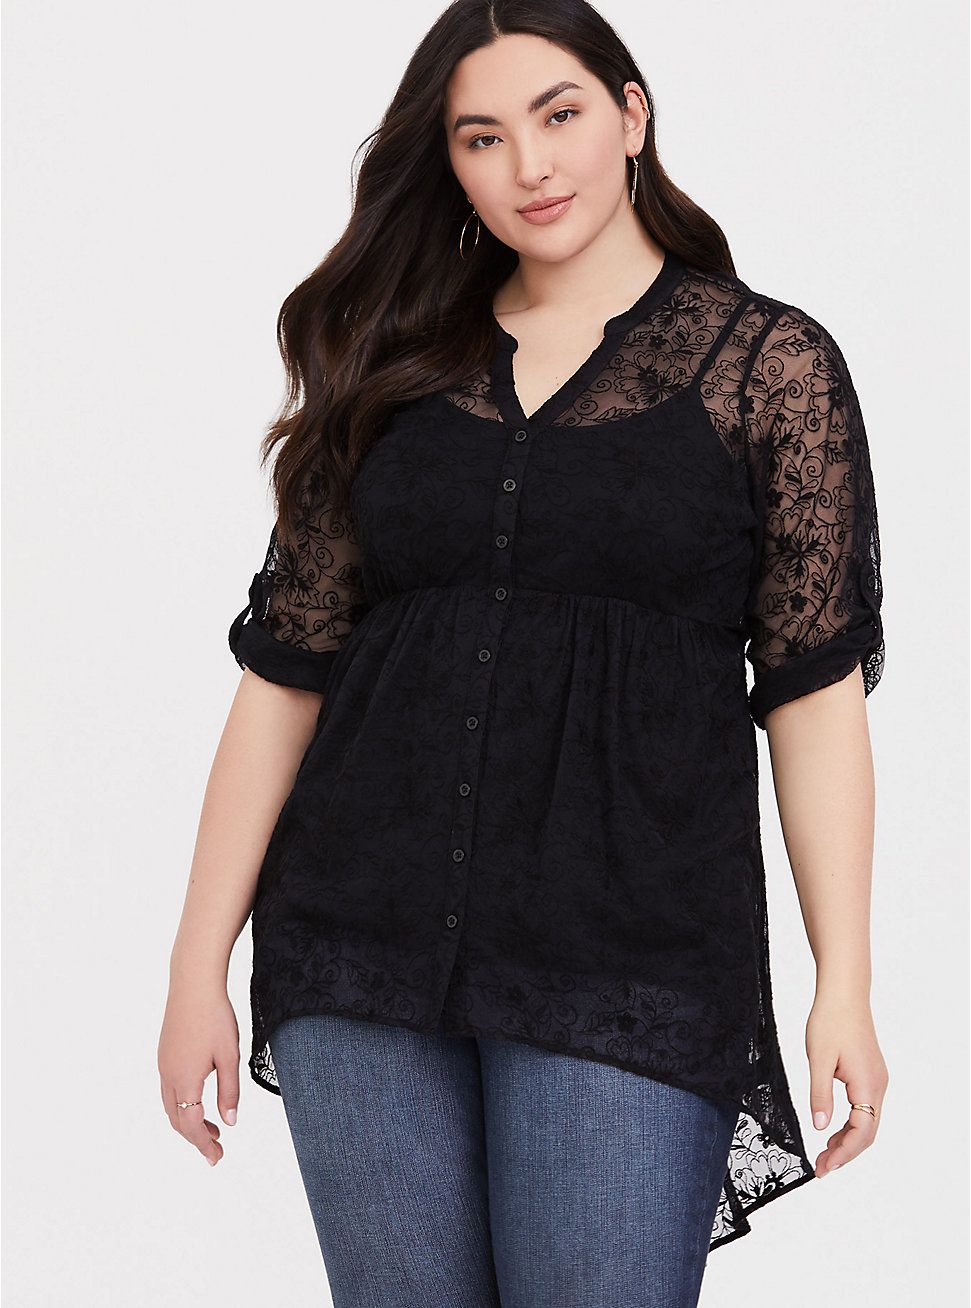 Can Black Lace Tunic Shirts For Plus Size Women Look Stylish And Flattering. 7 Times They Do